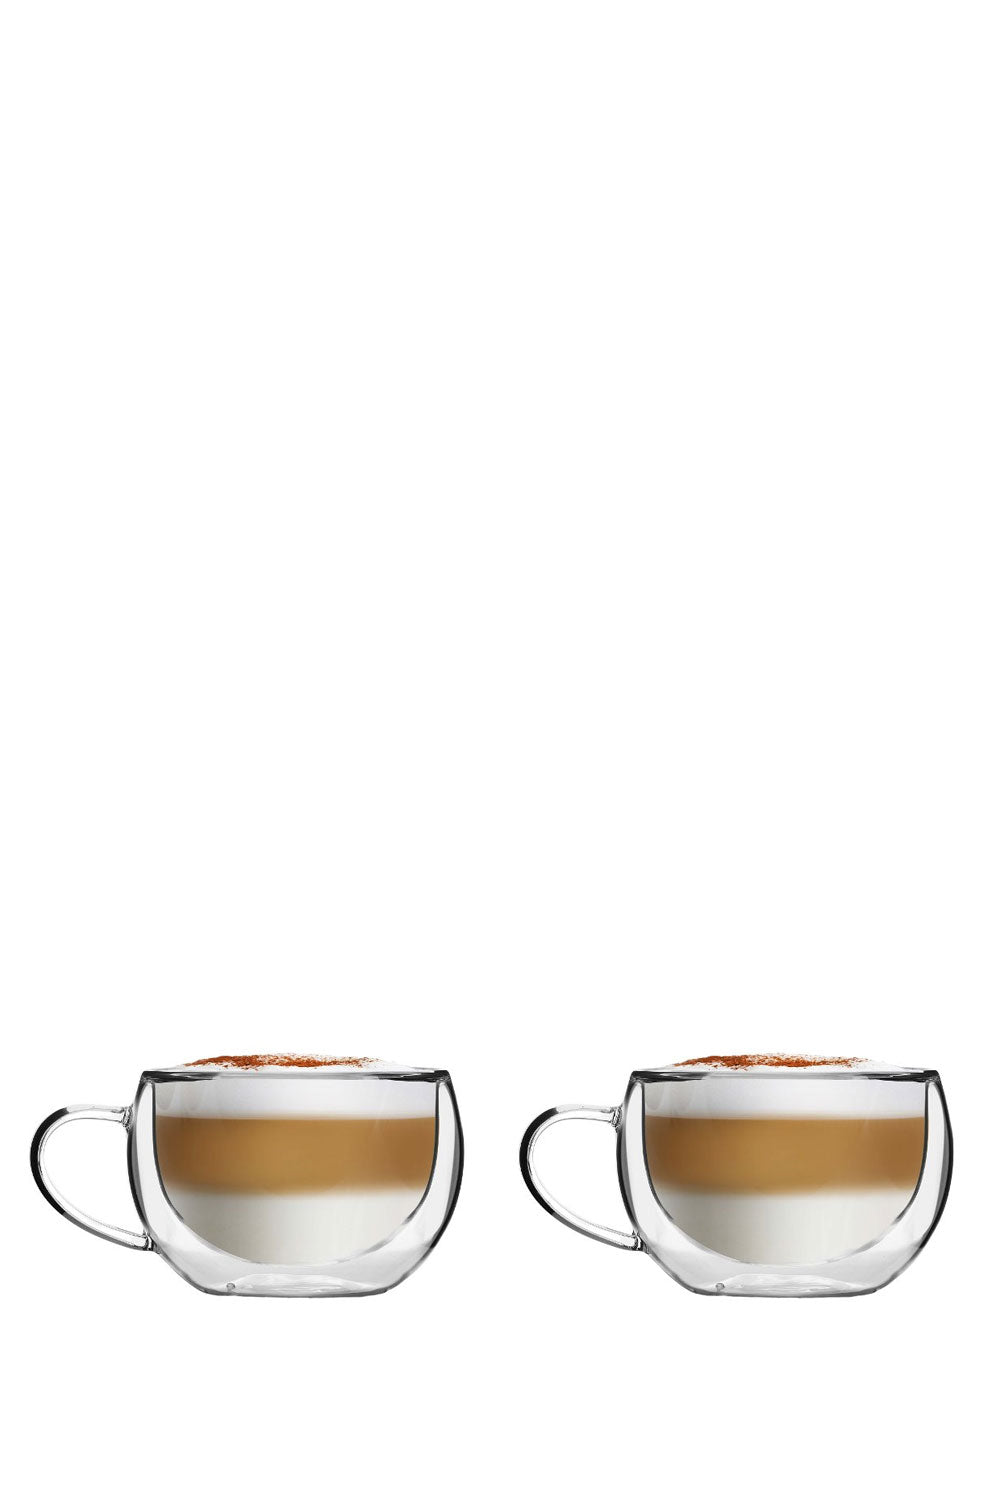 Bolla Double Wall Cups 300 ml, Set of 2